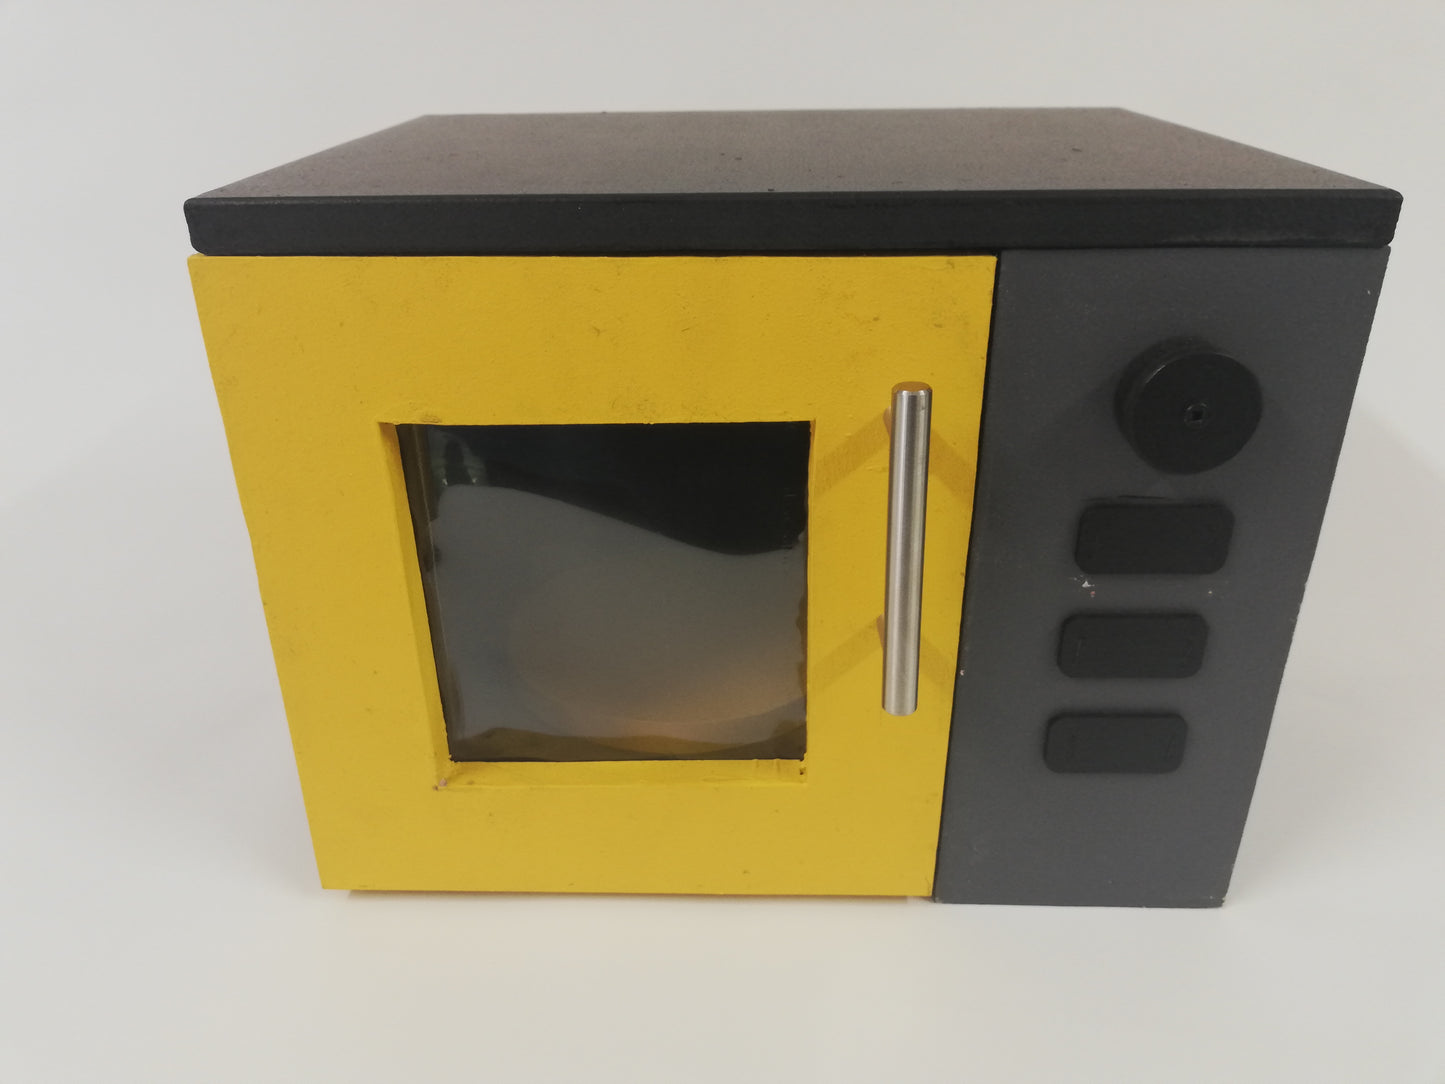 Kitchen Wooden Microwave Oven Edunation South Africa Kitchen Play